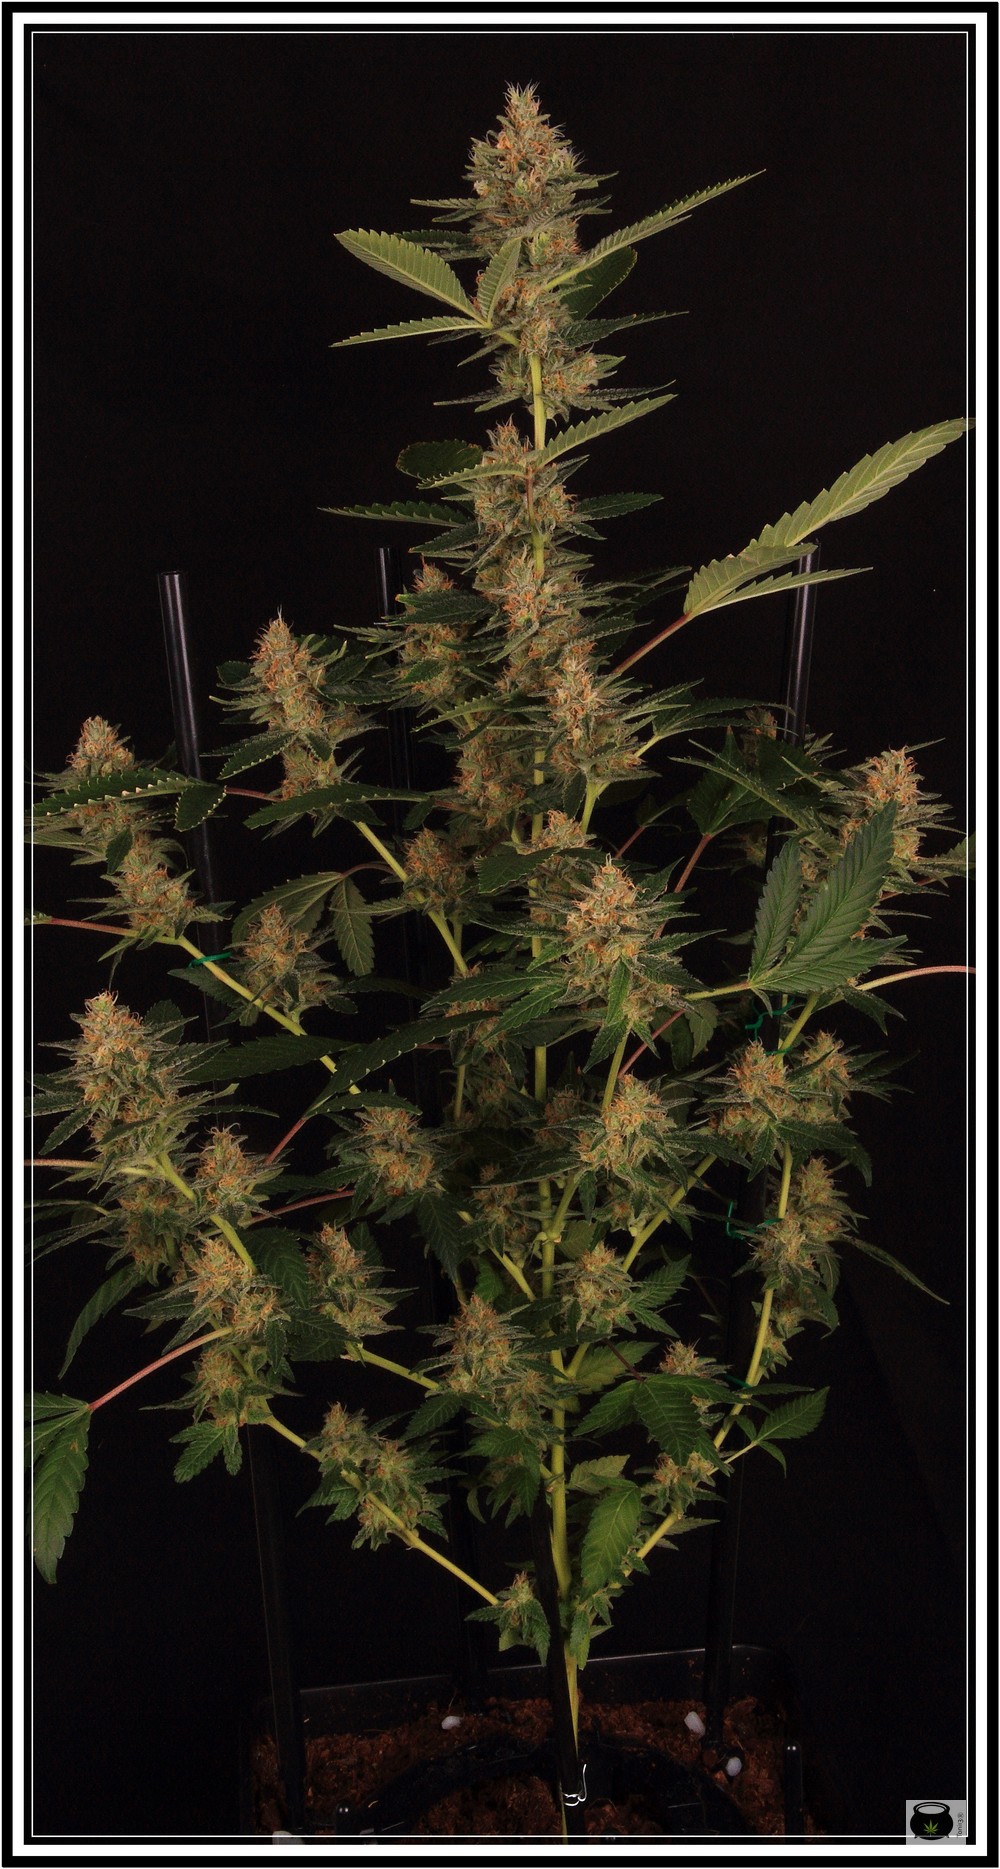 lavender soma seeds seleccion tintin cultivo marihuana ultimate plant cage